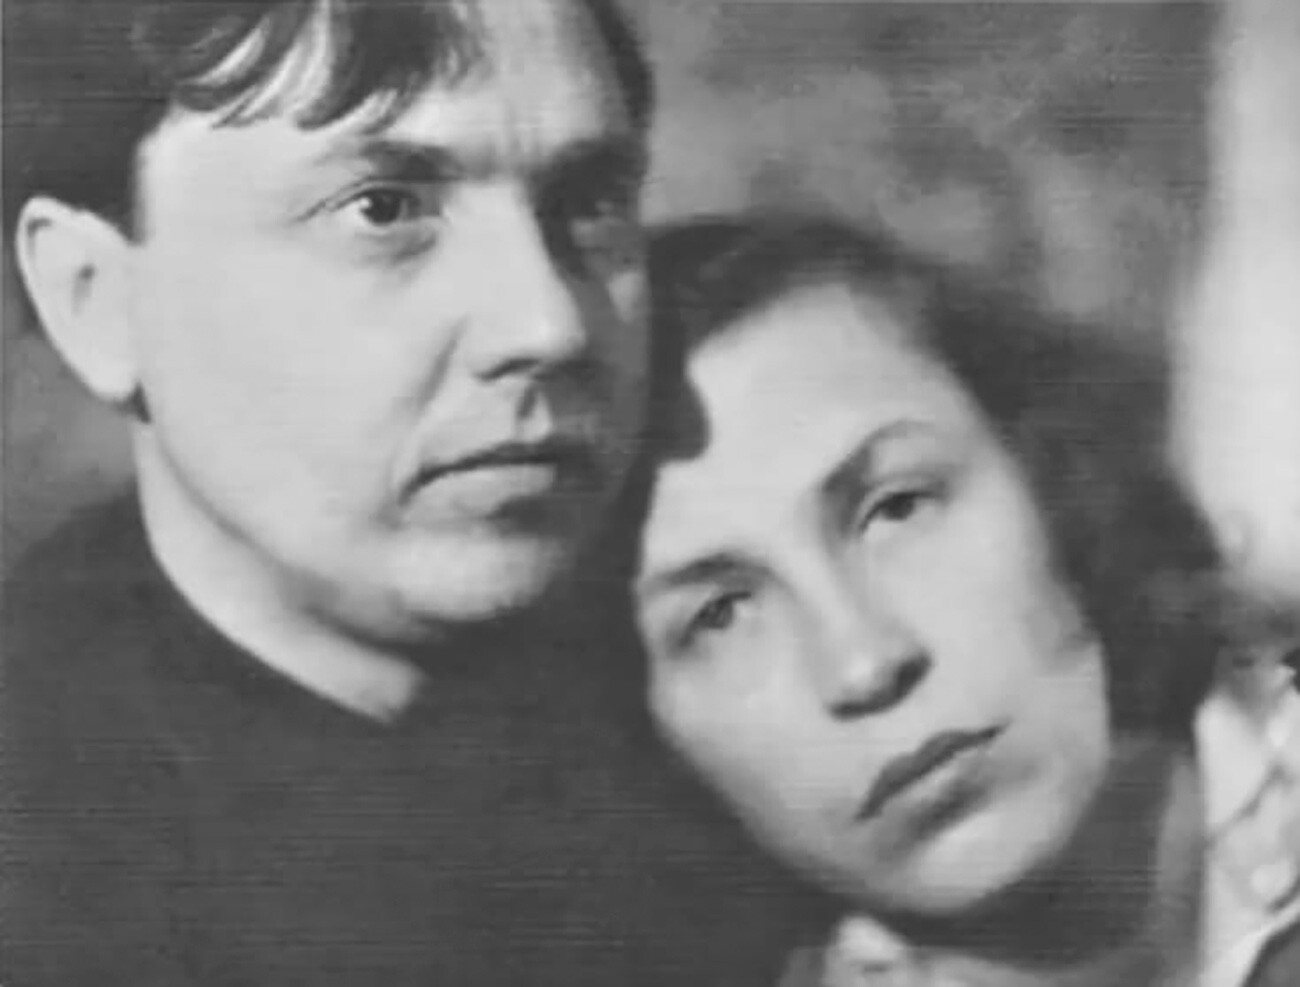 Malenkov with his wife Valentina